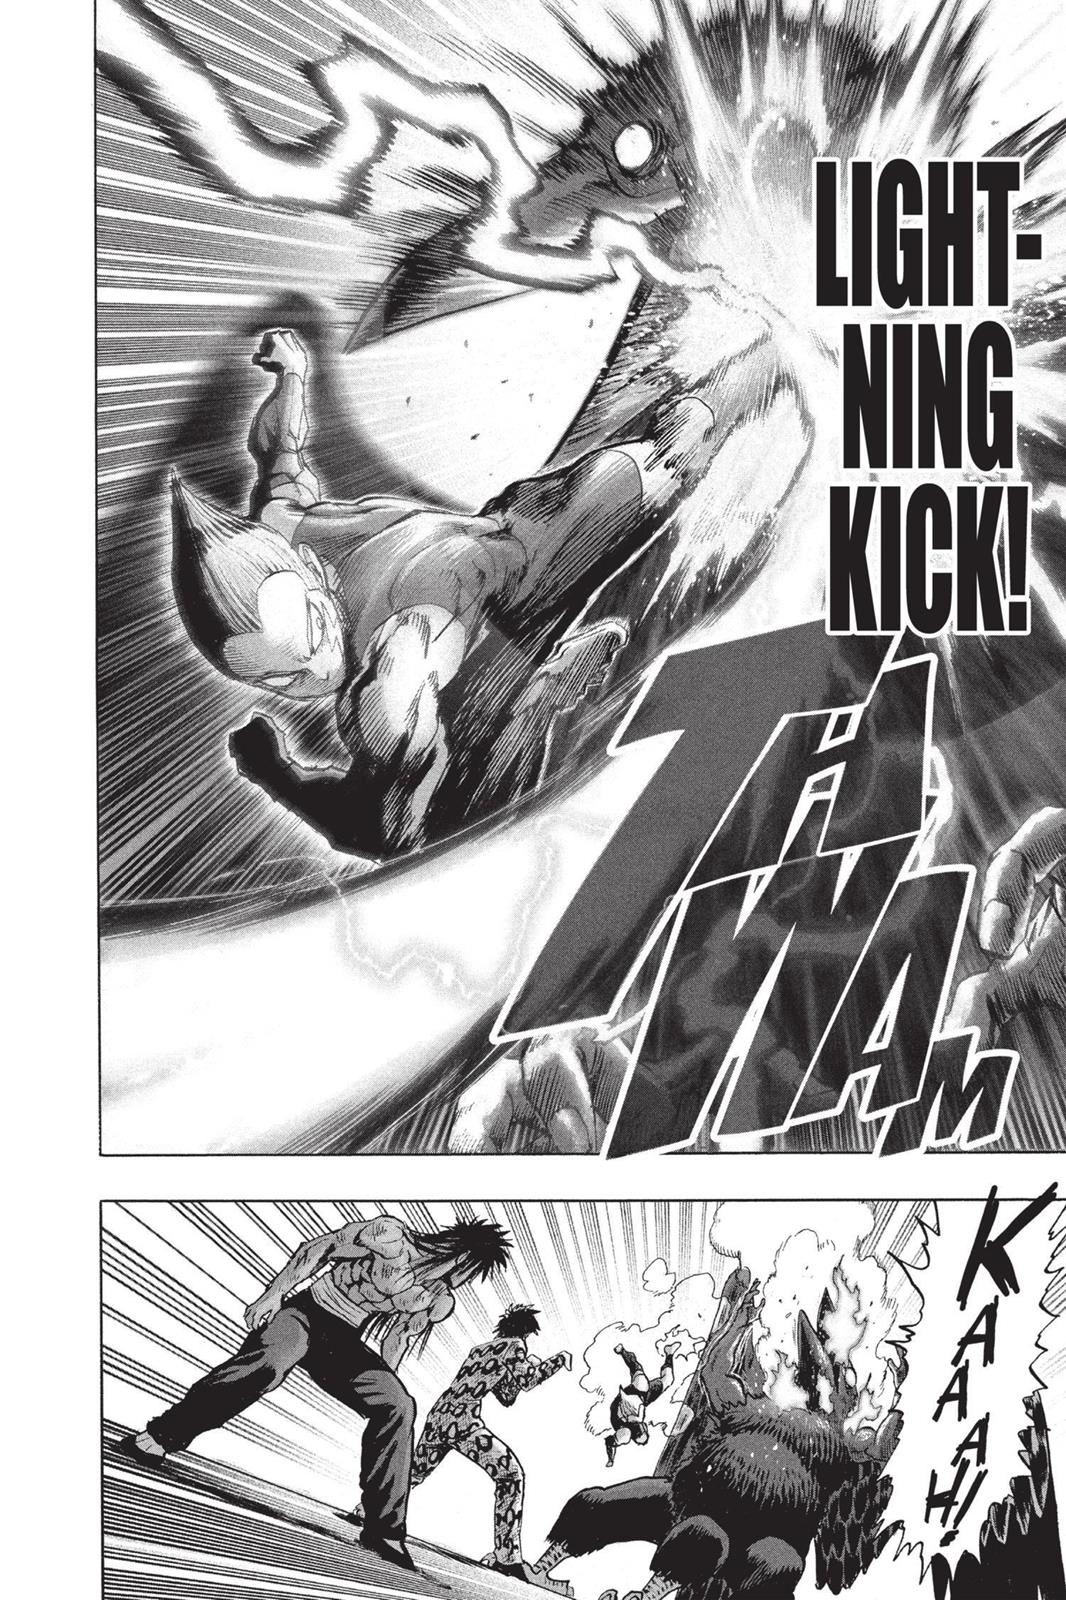 One-Punch Man, Punch 73 image 29